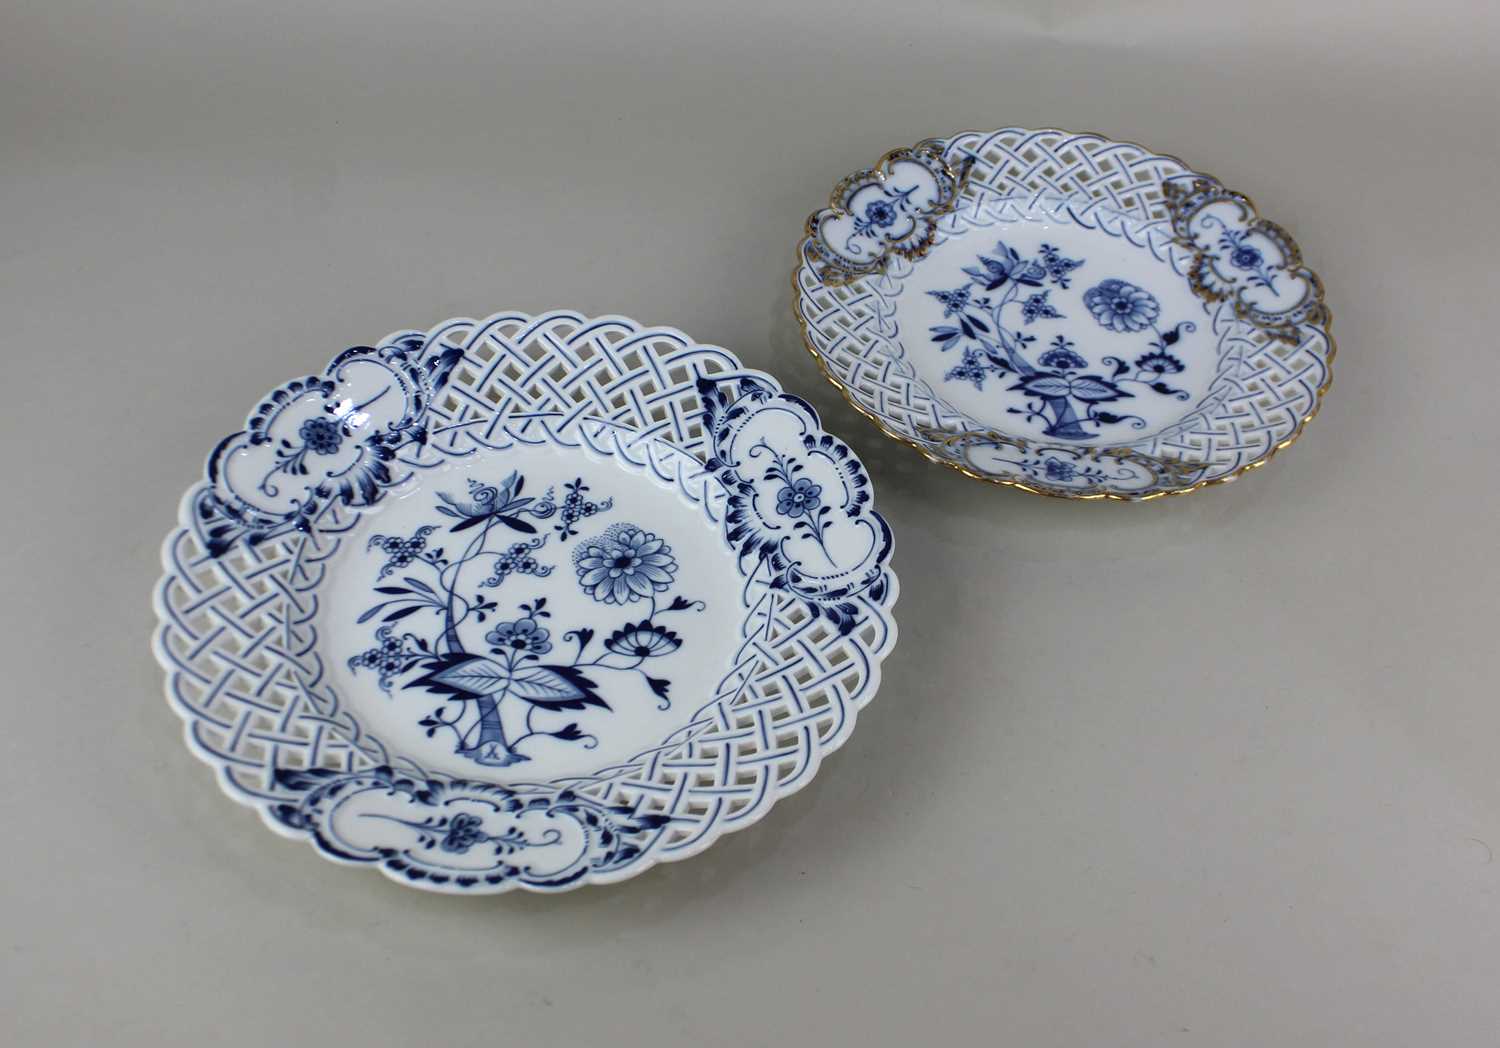 Two similar Meissen porcelain plates each with pierced woven border and blue floral design on